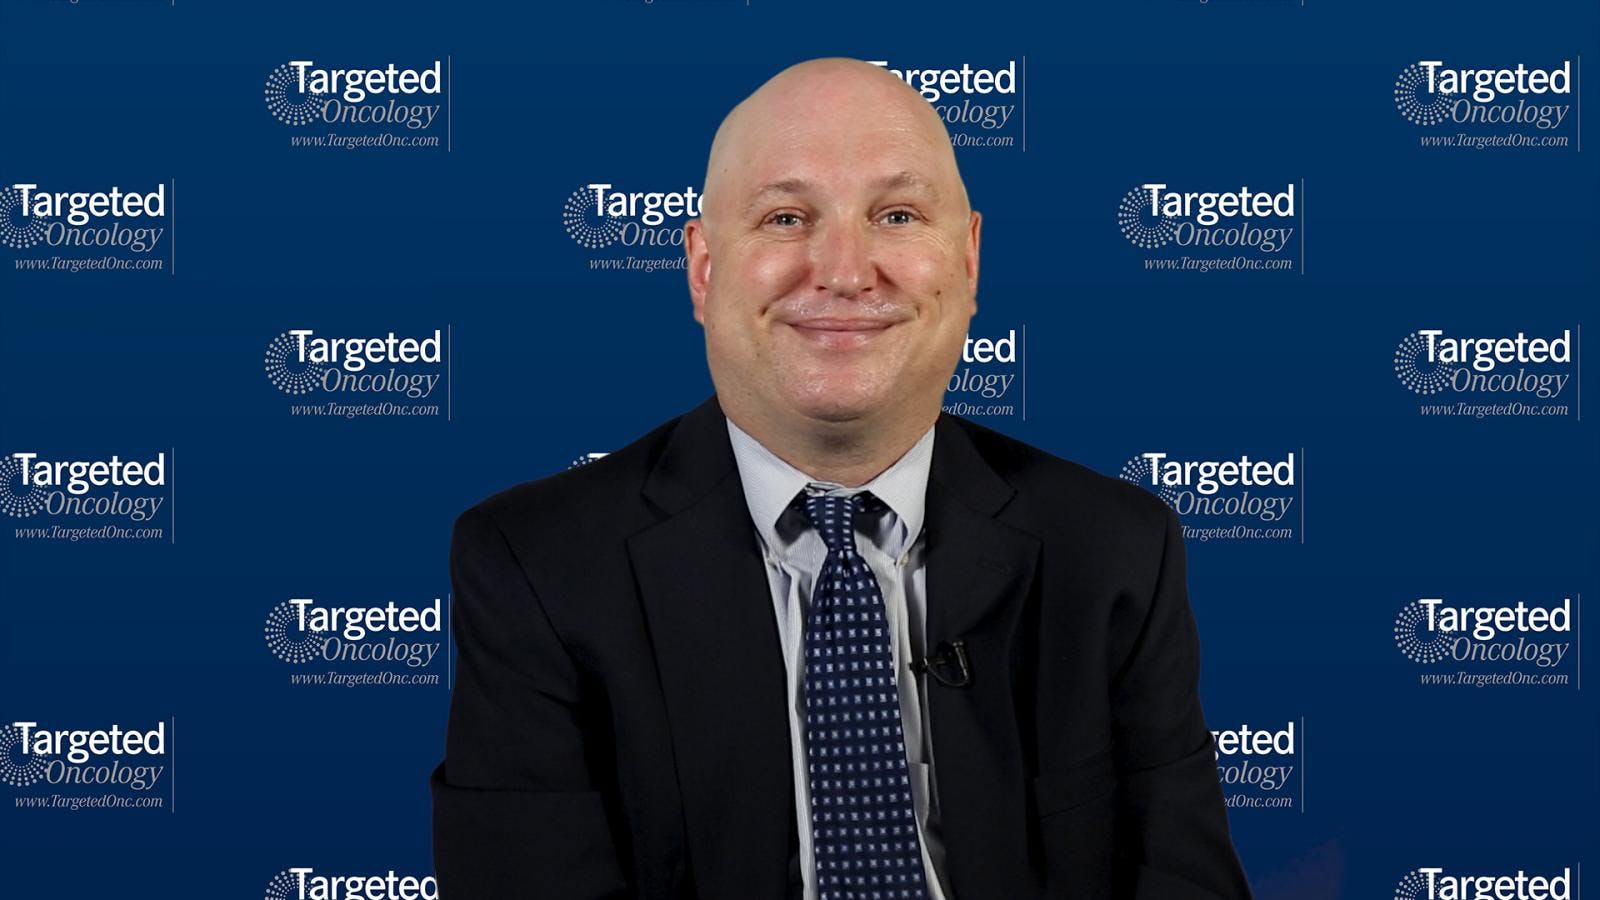 Treatment of Refractory Metastatic Renal Cell Carcinoma